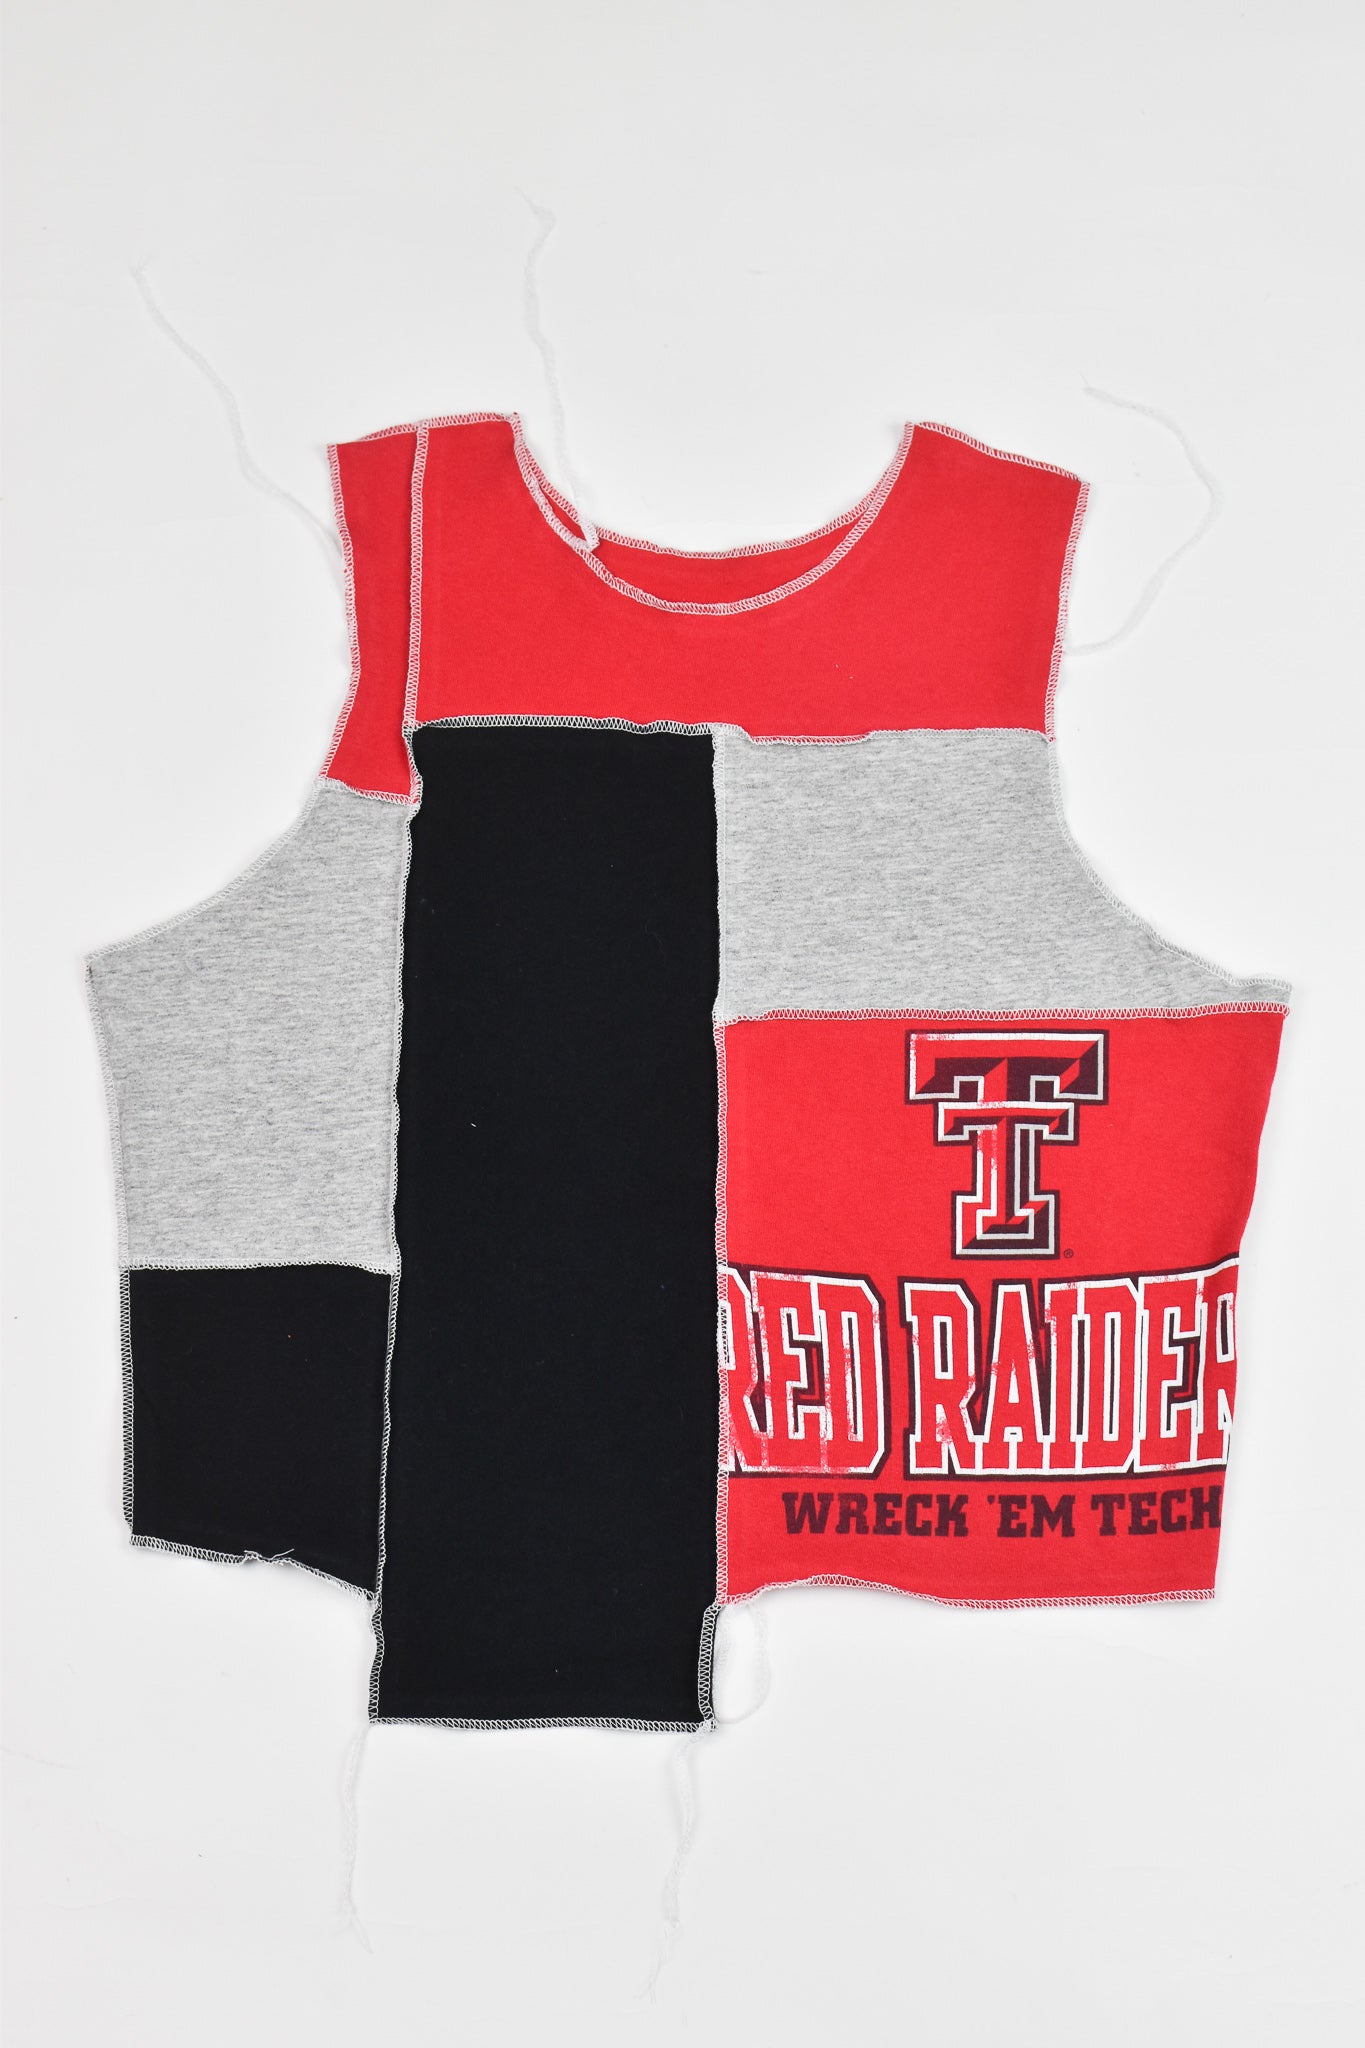 Upcycled Texas Tech Scrappy Tank Top